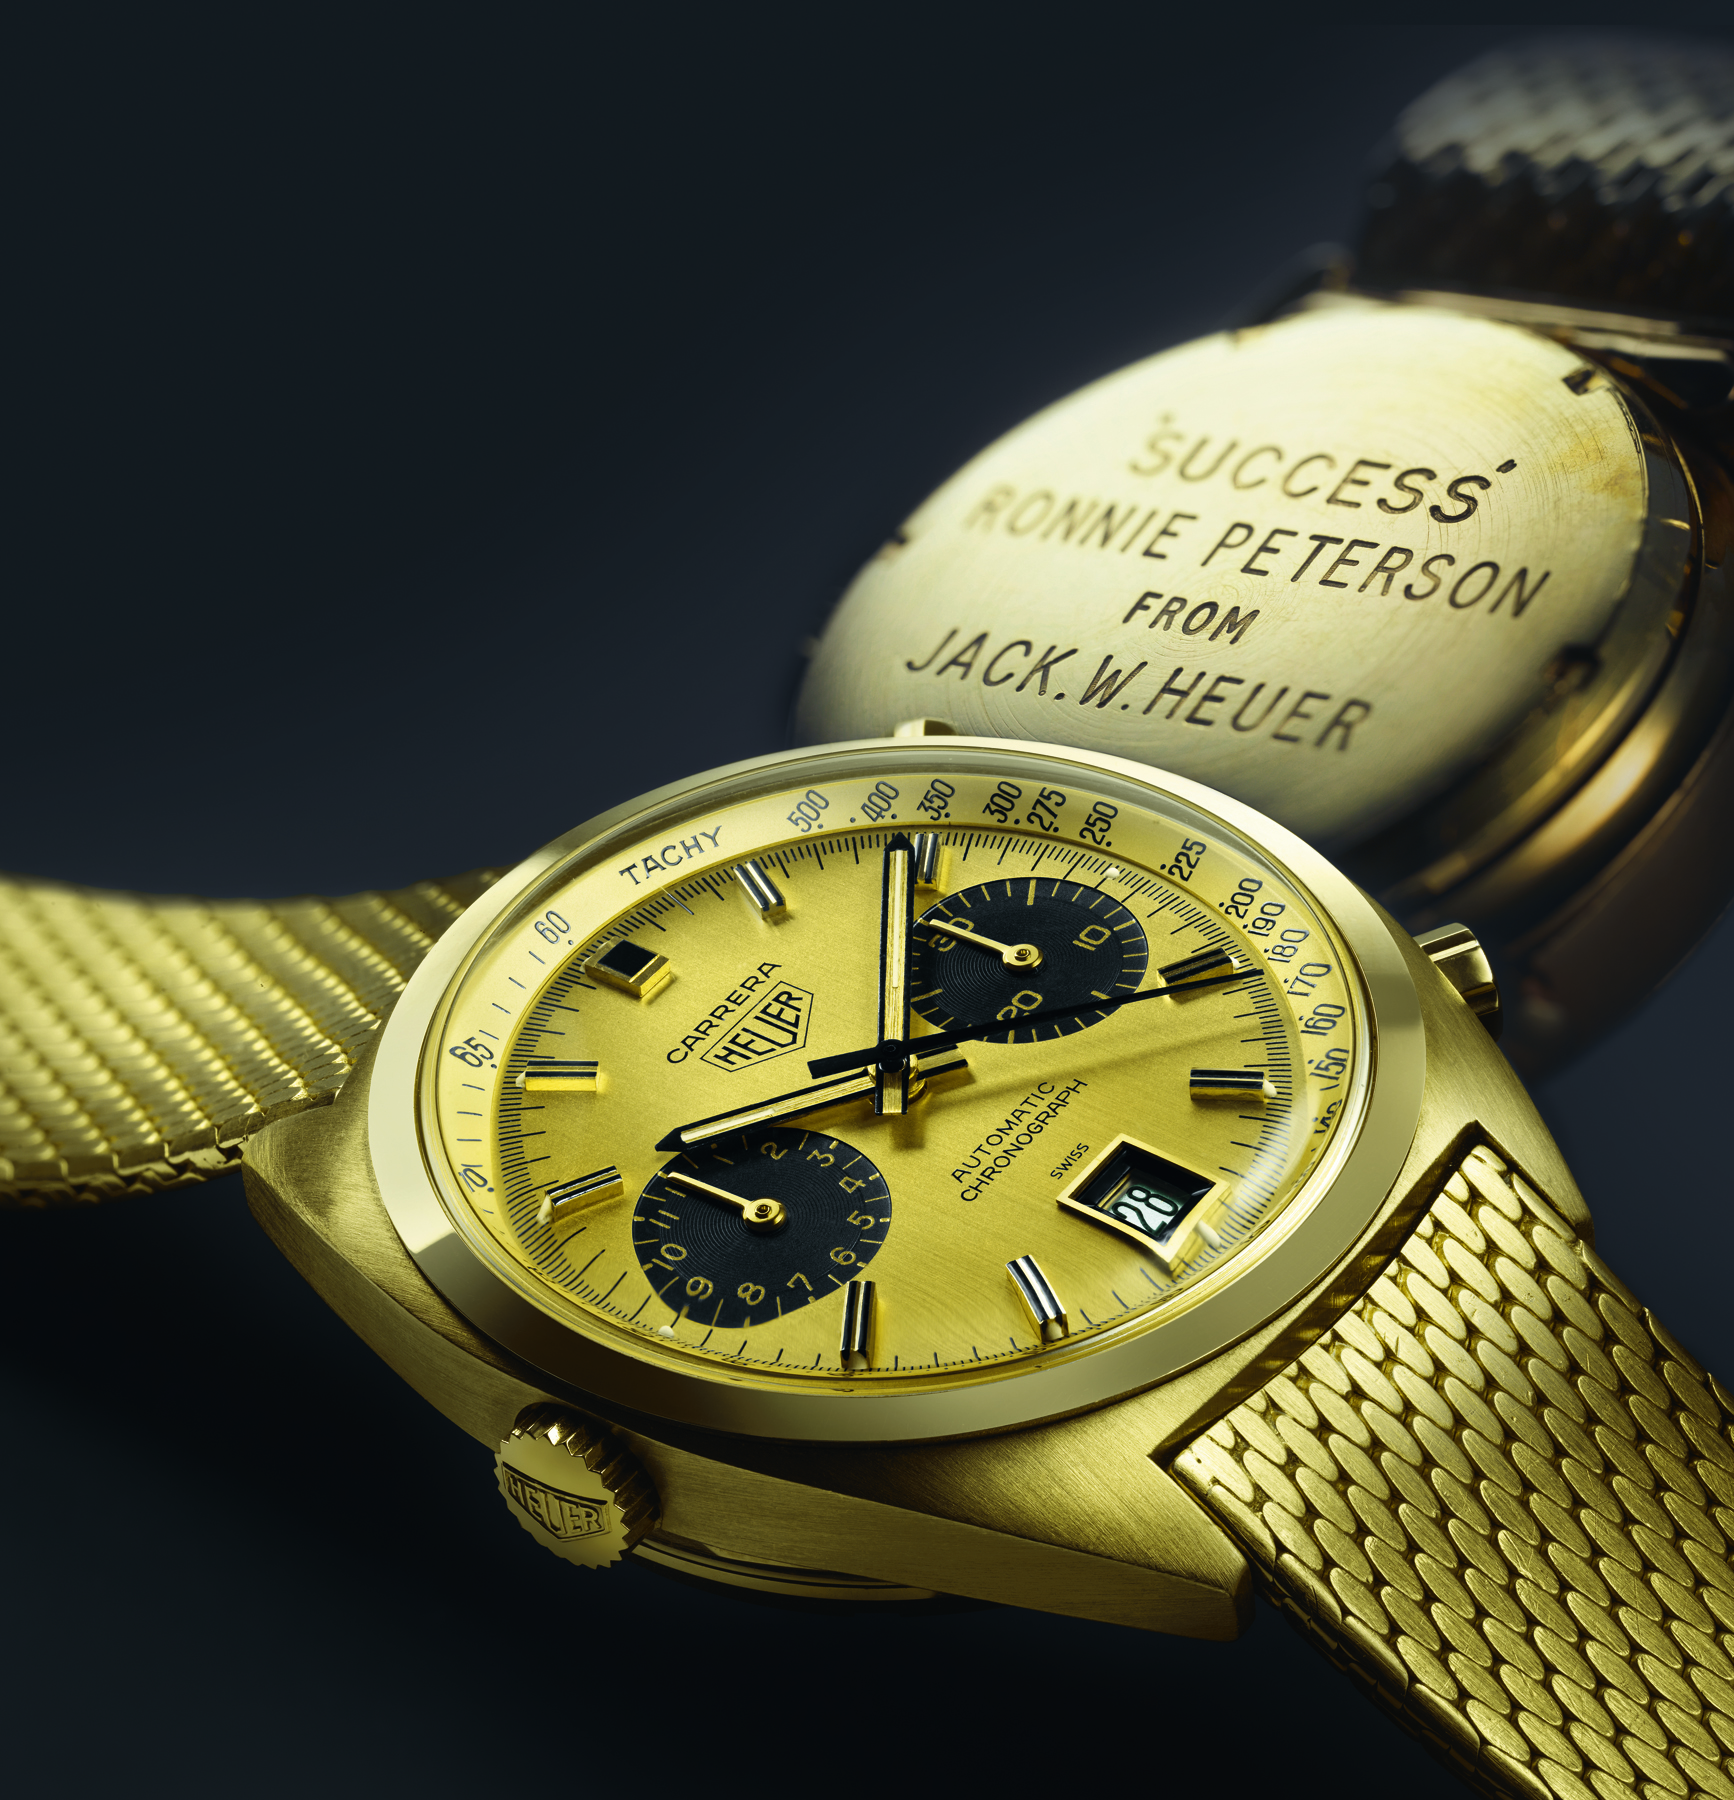 Tag heuer 1158 chn ronnie peterson